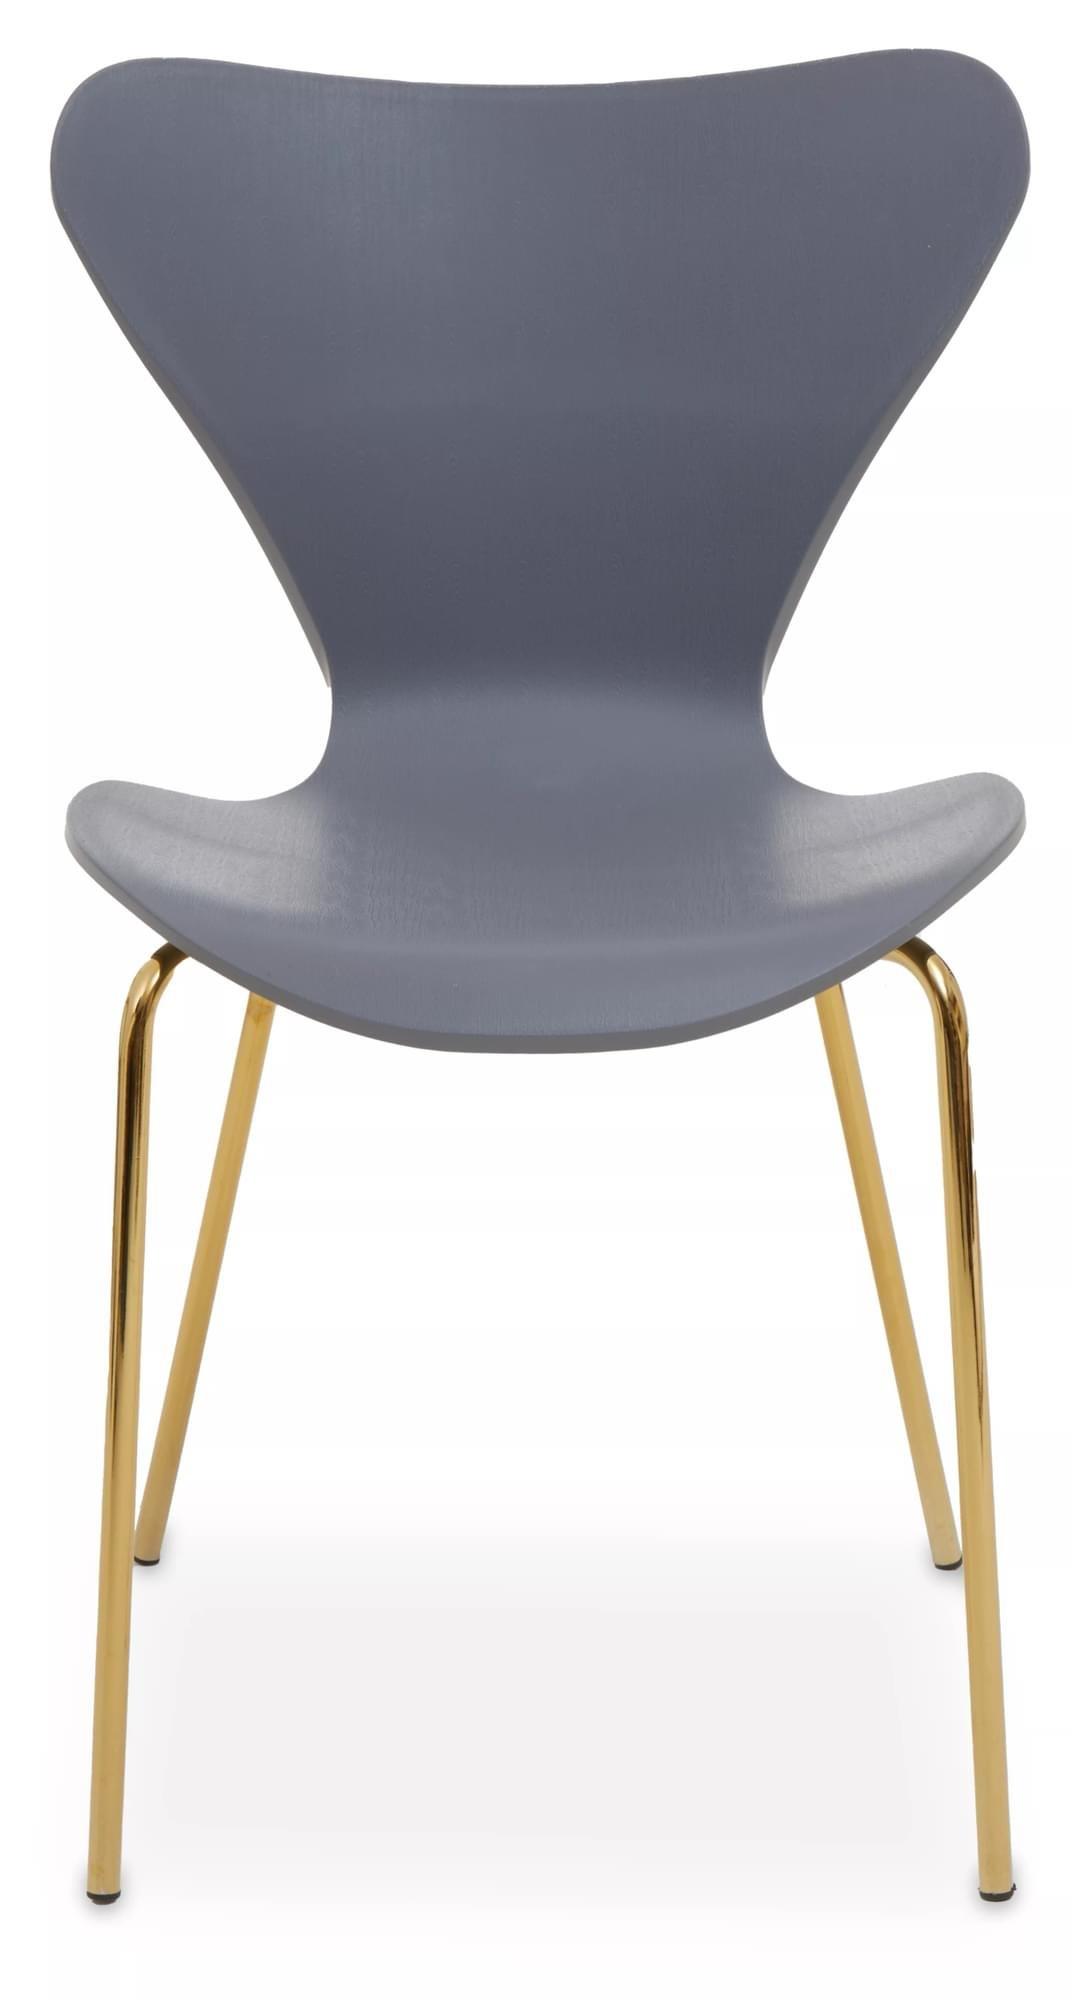 Interiors by Premier Laila Dining Chair